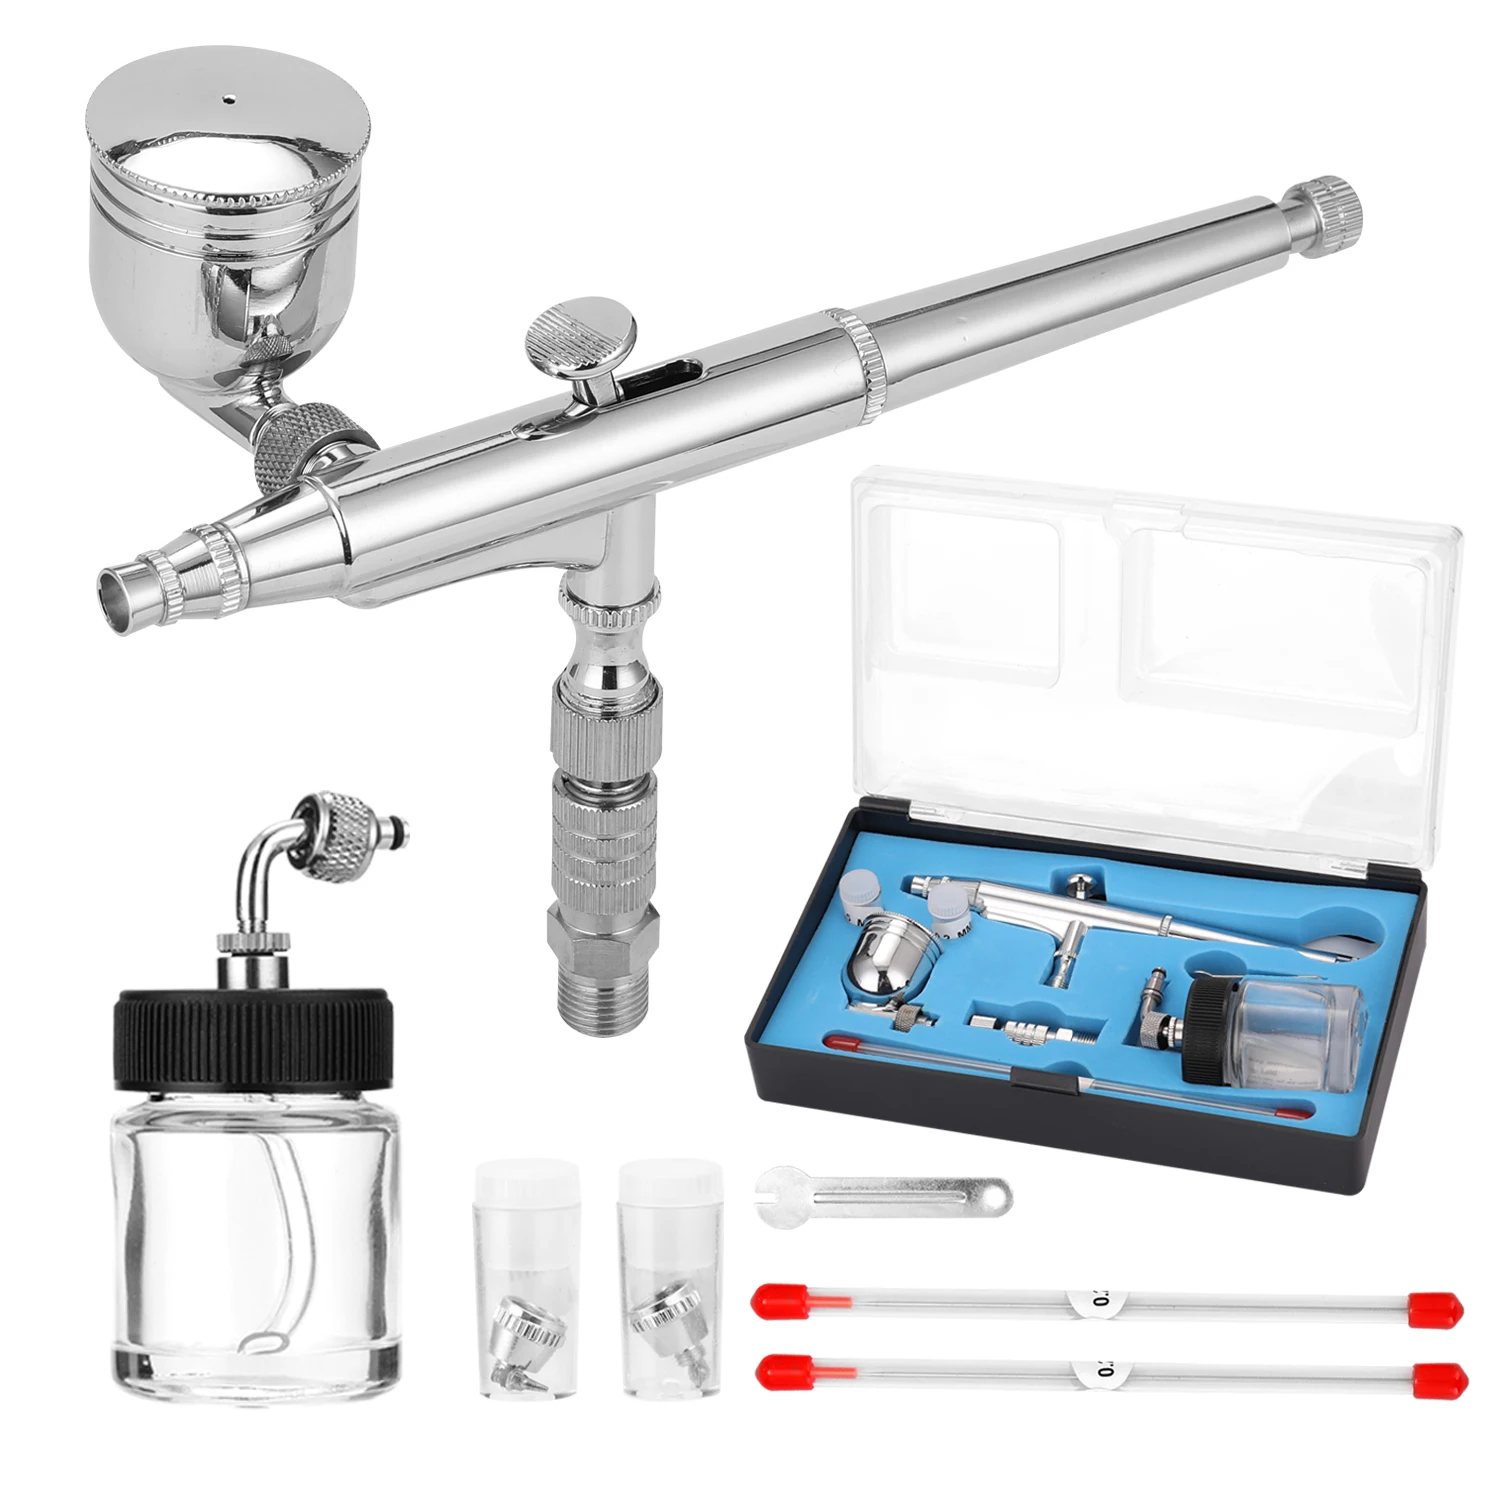 

Professional Airbrush Set for Model Making Art Painting with G1/8 Adapter Wrentch 2 Fluid Cups 2Needles 2 Nozzles